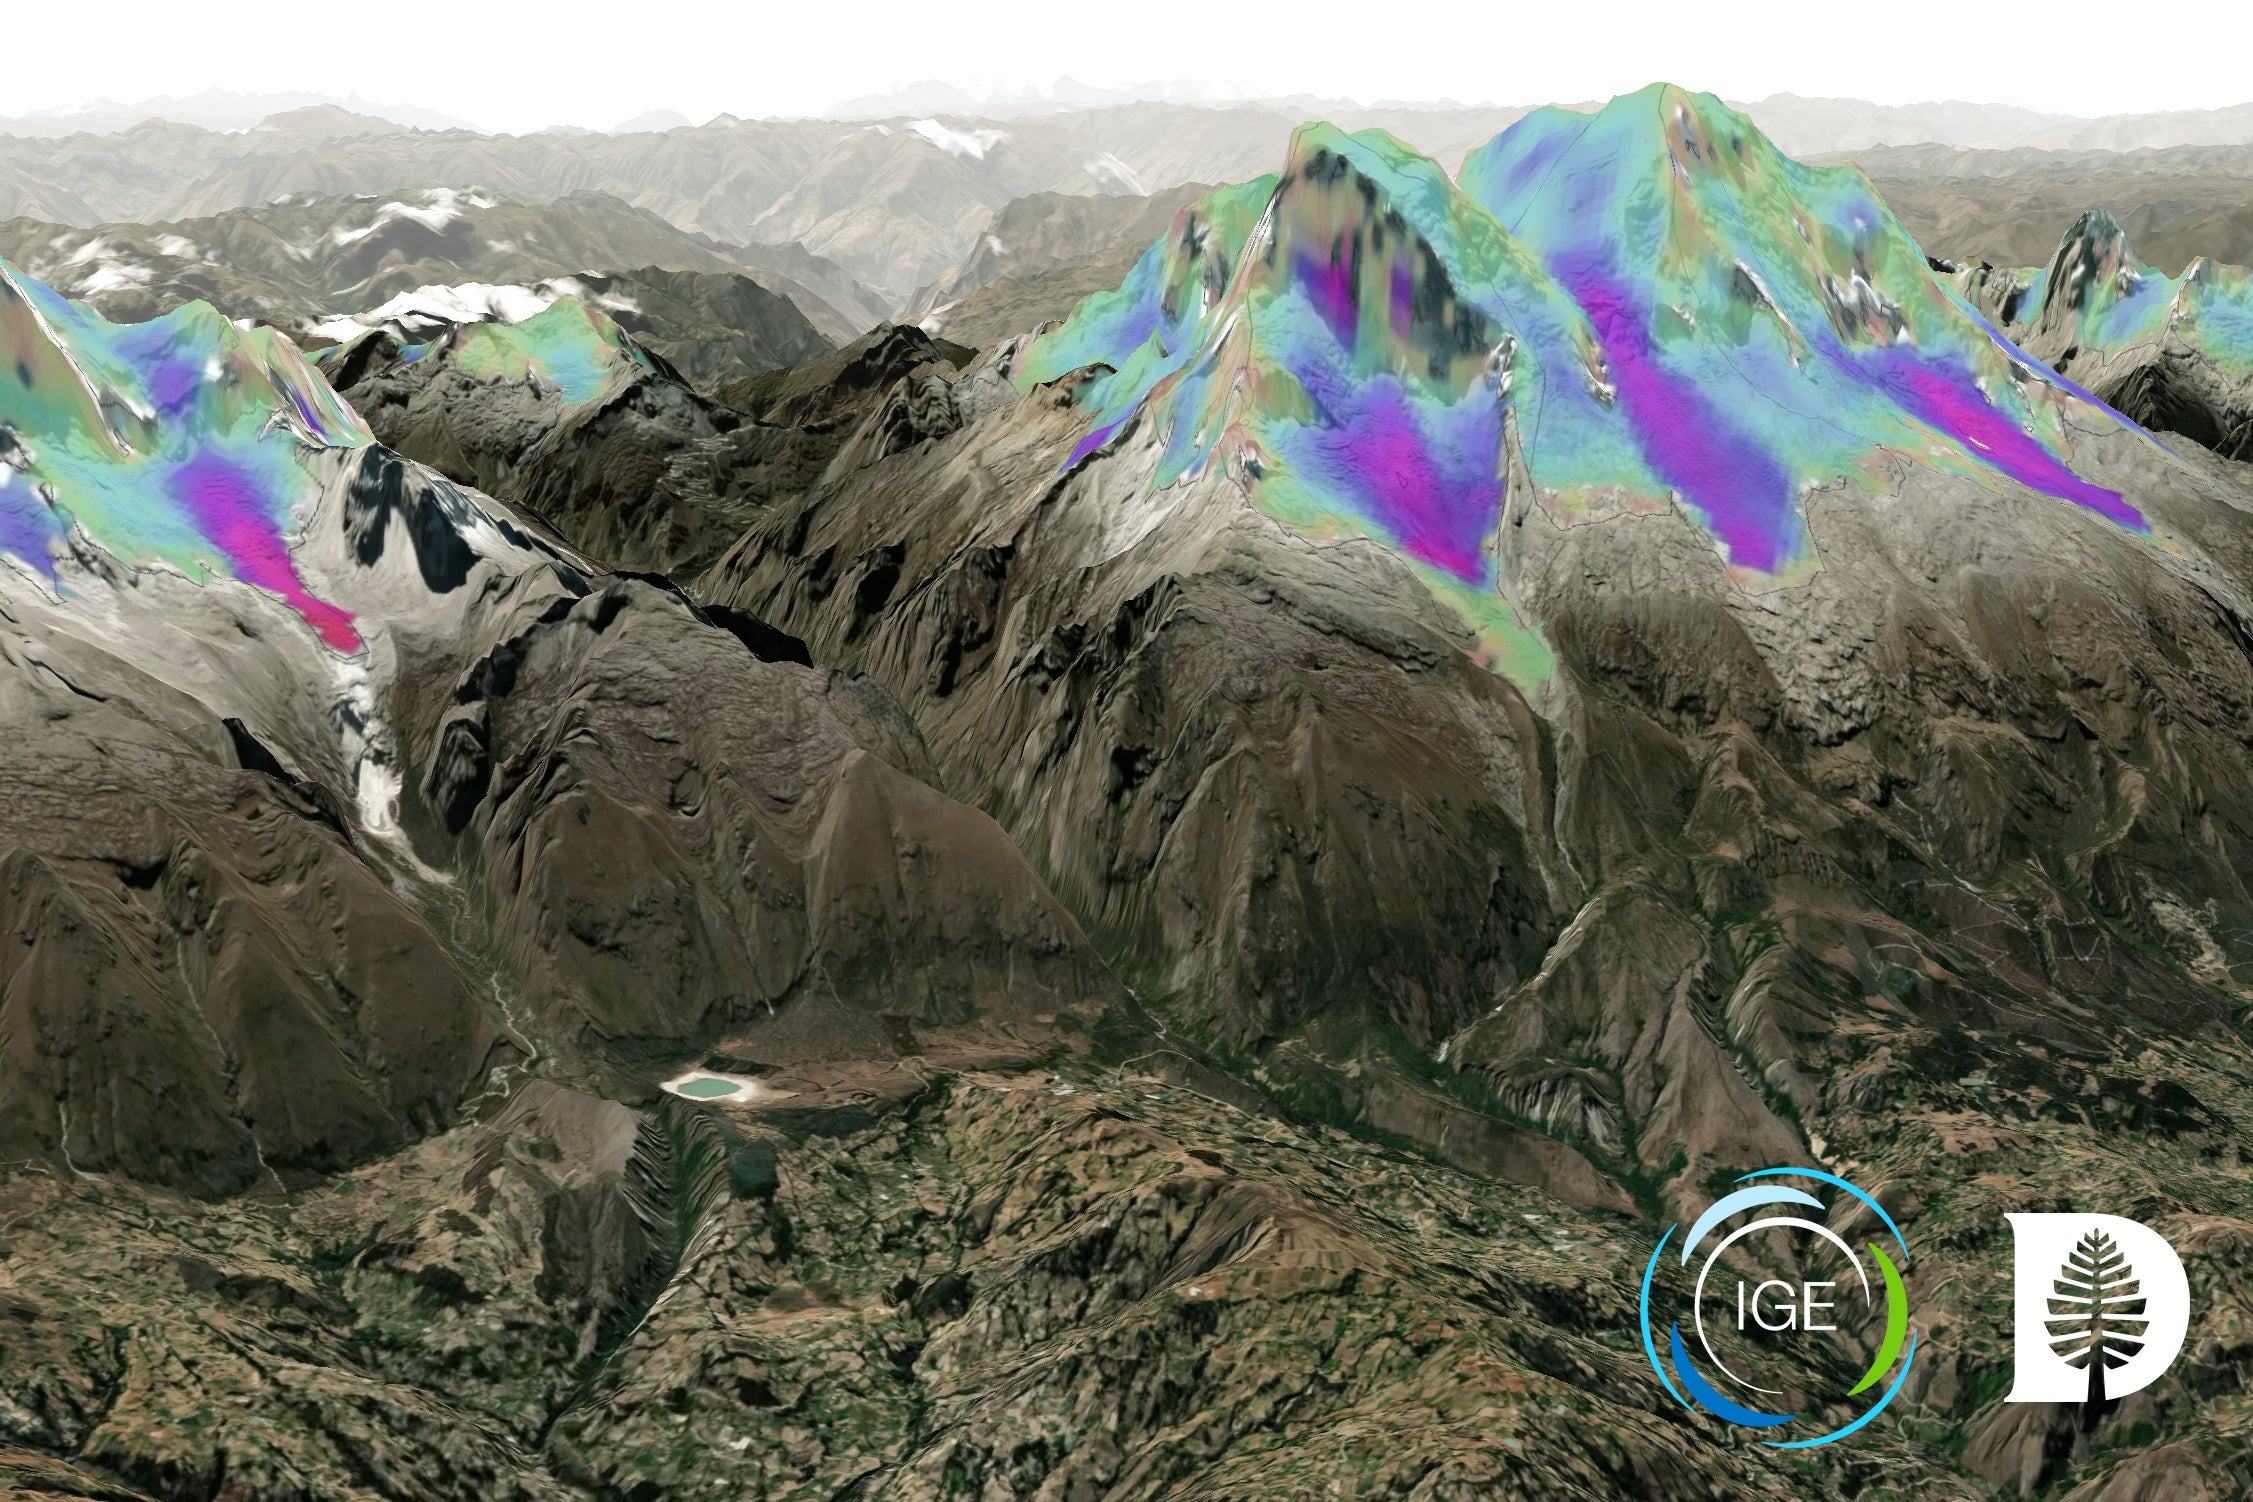 Using data on glacier velocity, South America’s tropical Andes mountains were found to have up to 23% less ice and freshwater availability. Darker colors overlayed here on Peru’s Cordillera Blanca range, signify faster glacial speed